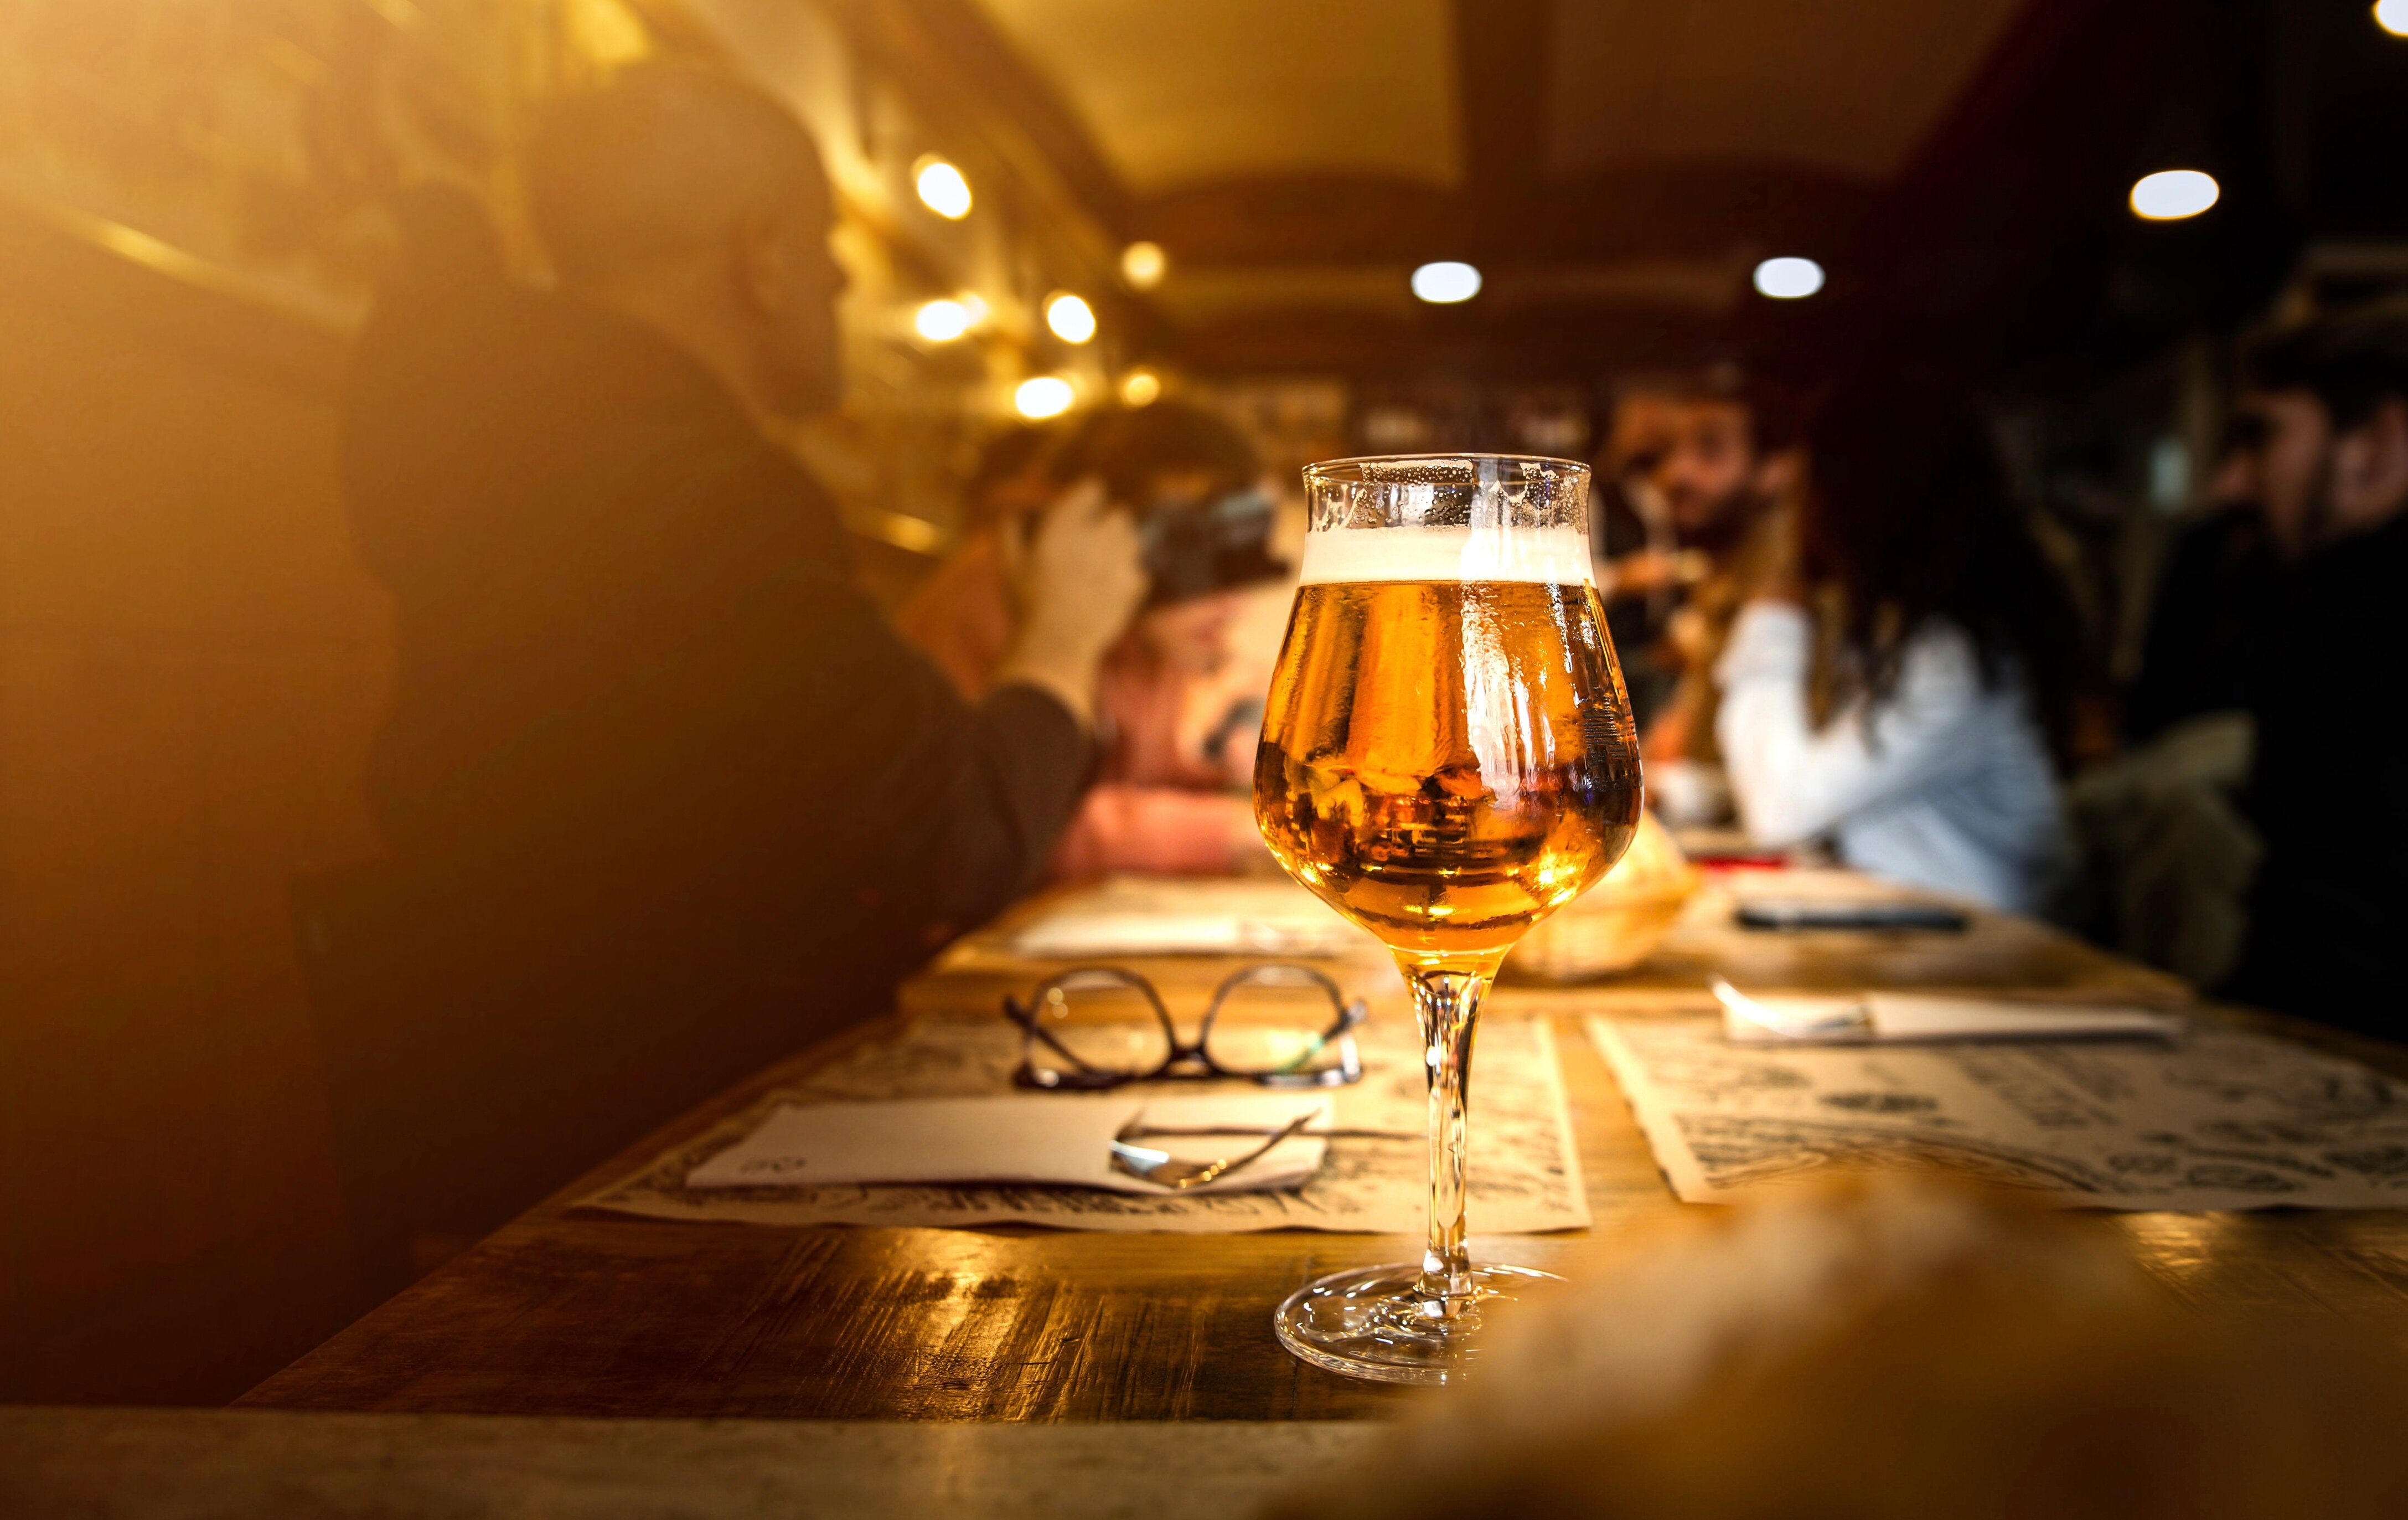 Sales up for managed pubs, bars and restaurants but costs bite